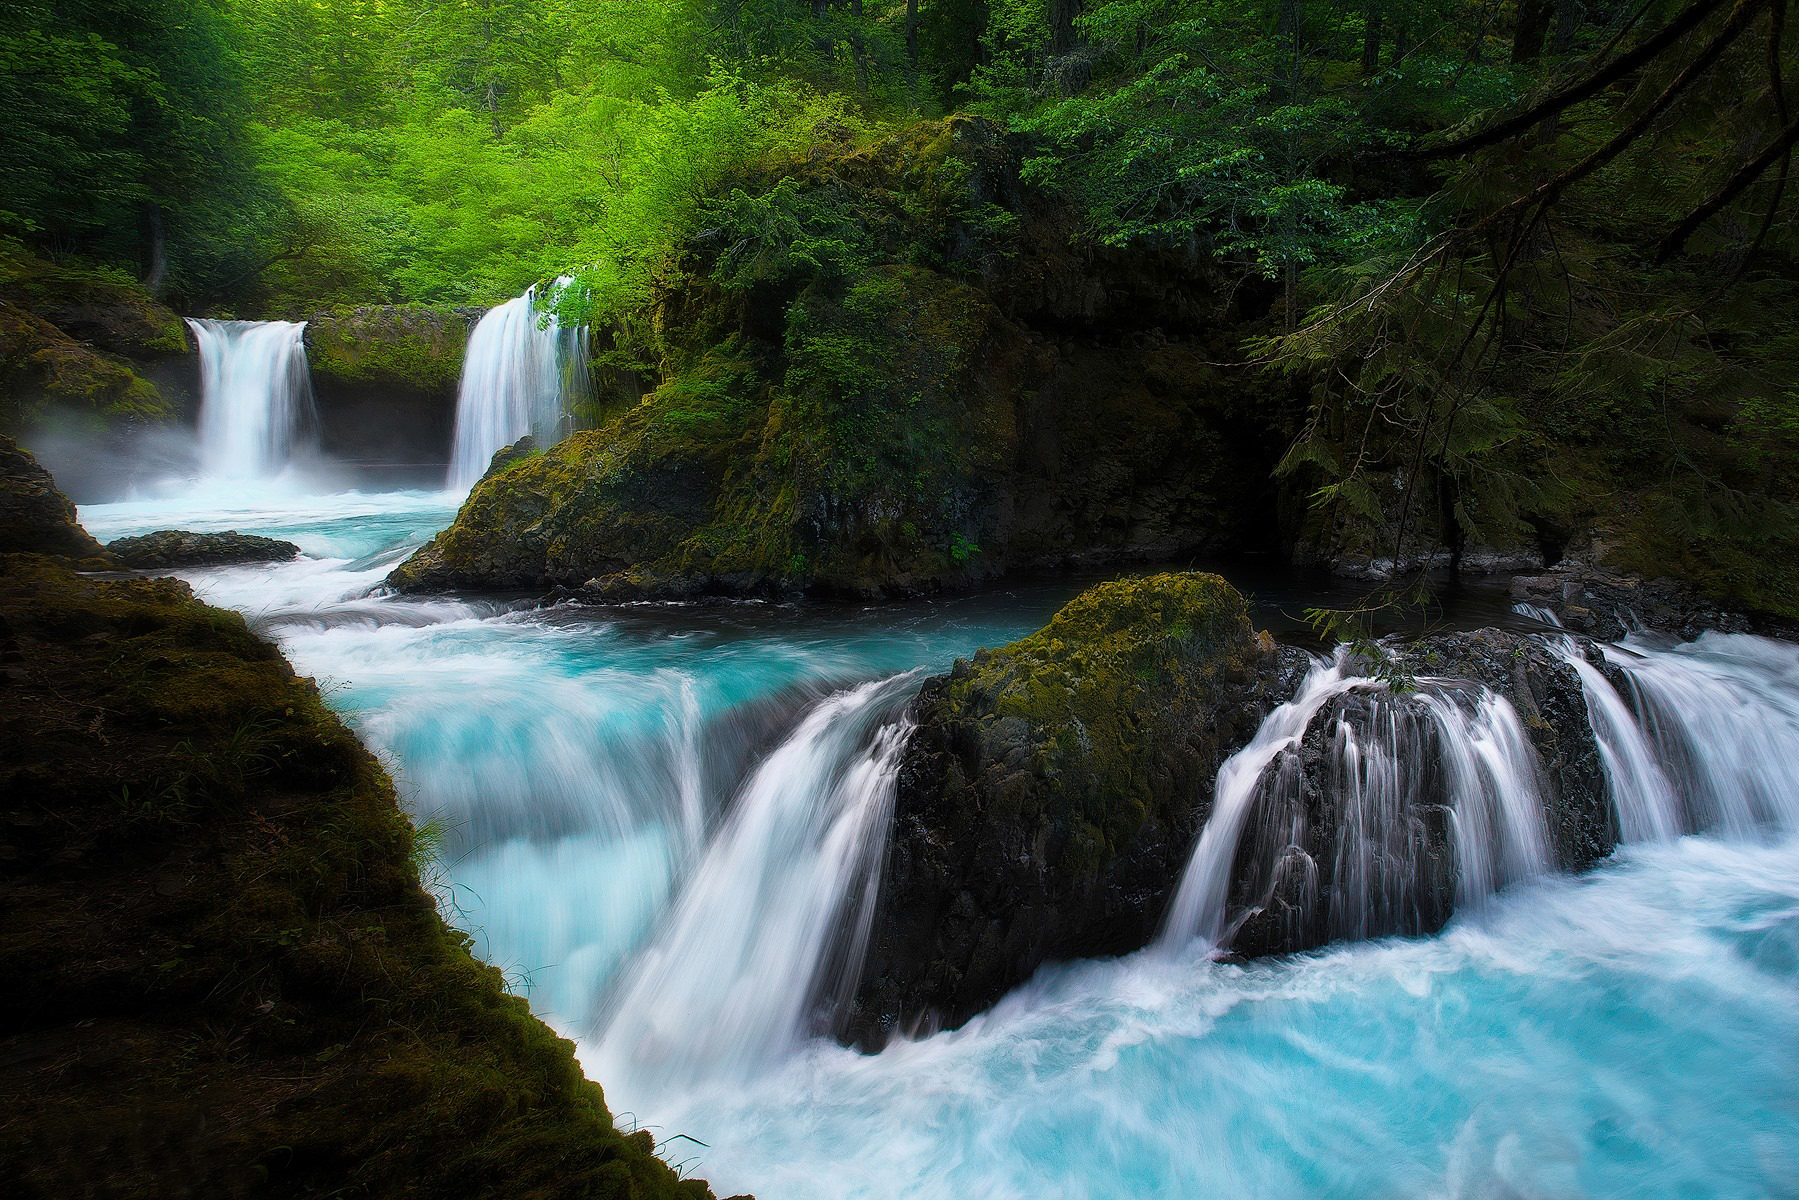 8 creative tips for shooting waterfalls: Digital Photography Review